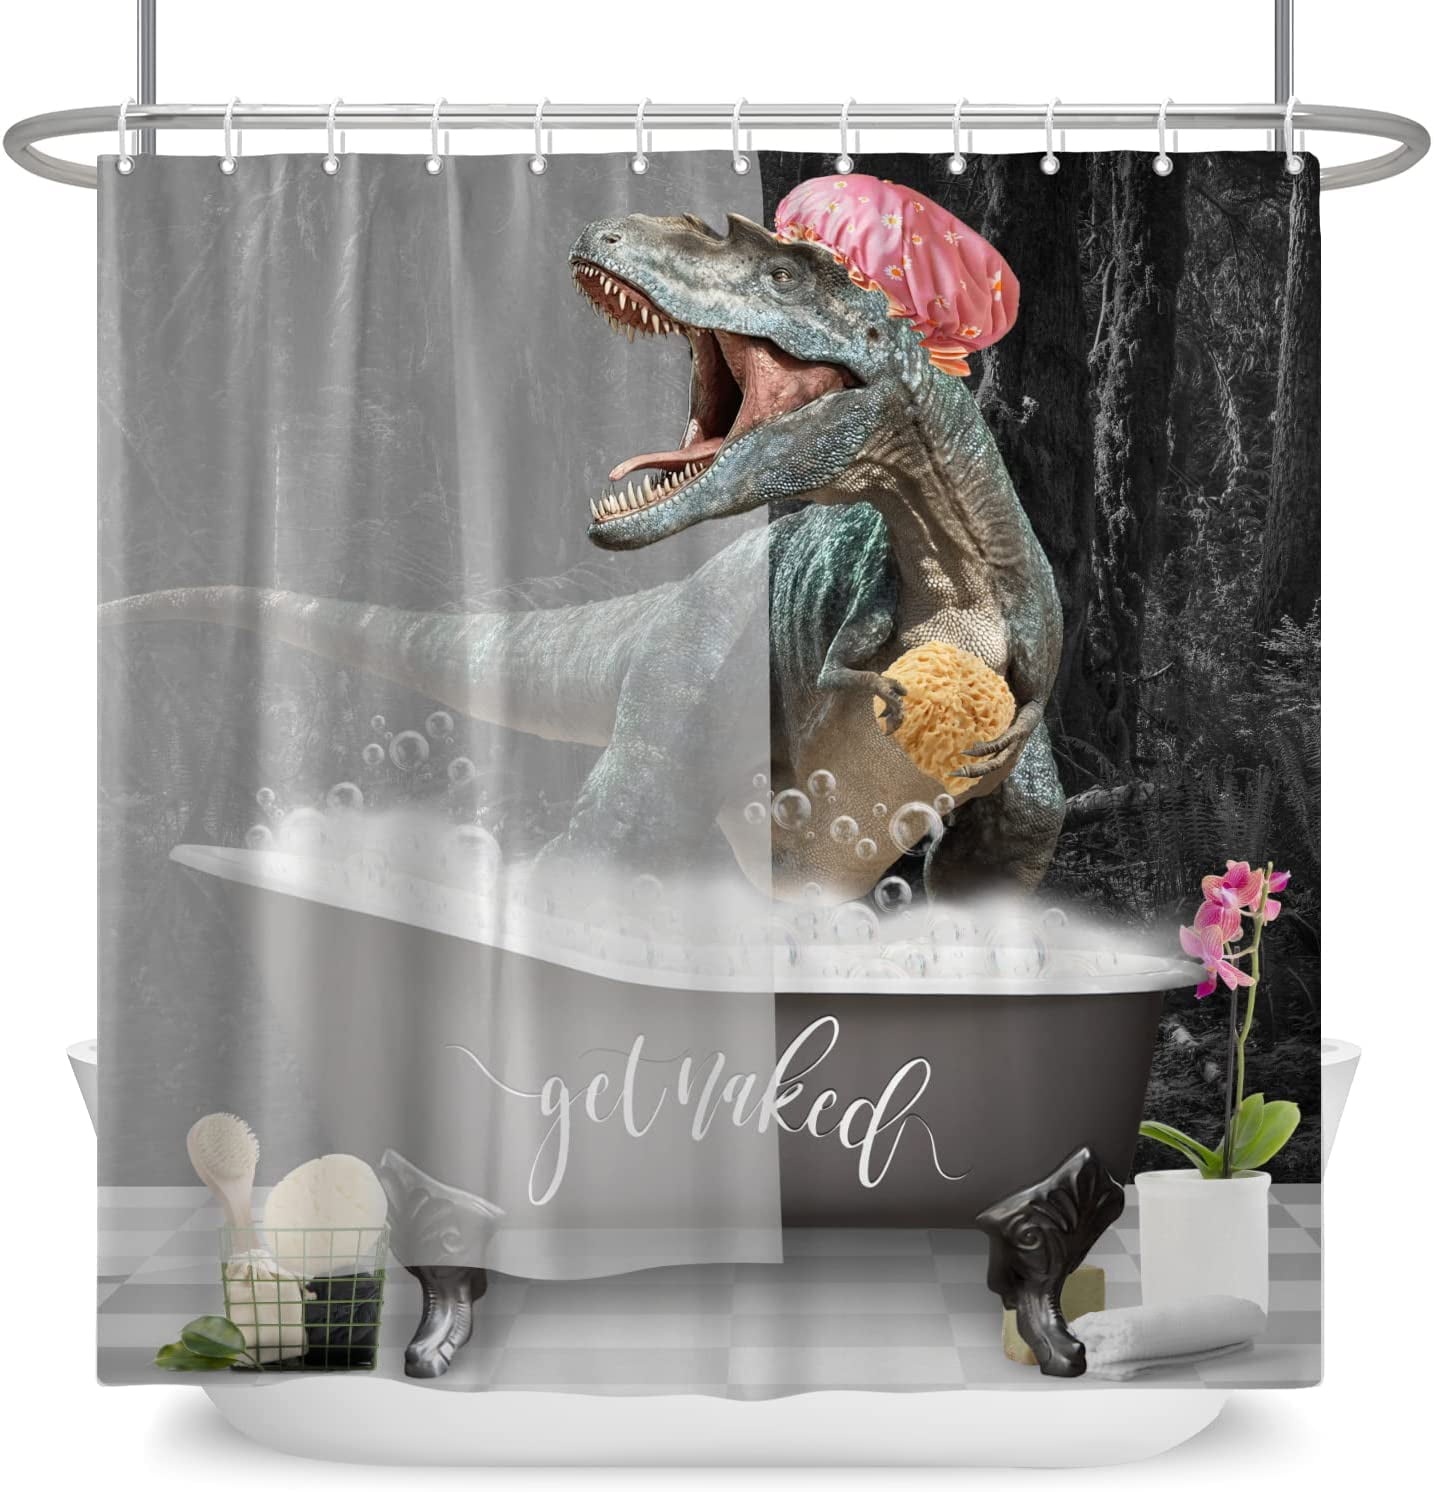 Funny Dinosaur Shower Curtain 72 x 72 Inch, Green Dinosaur Get Naked Raptor  with Sunglasses Cute Animal Reptile Dino Bath Curtain for Bathroom Home  Decor Polyester Waterproof 